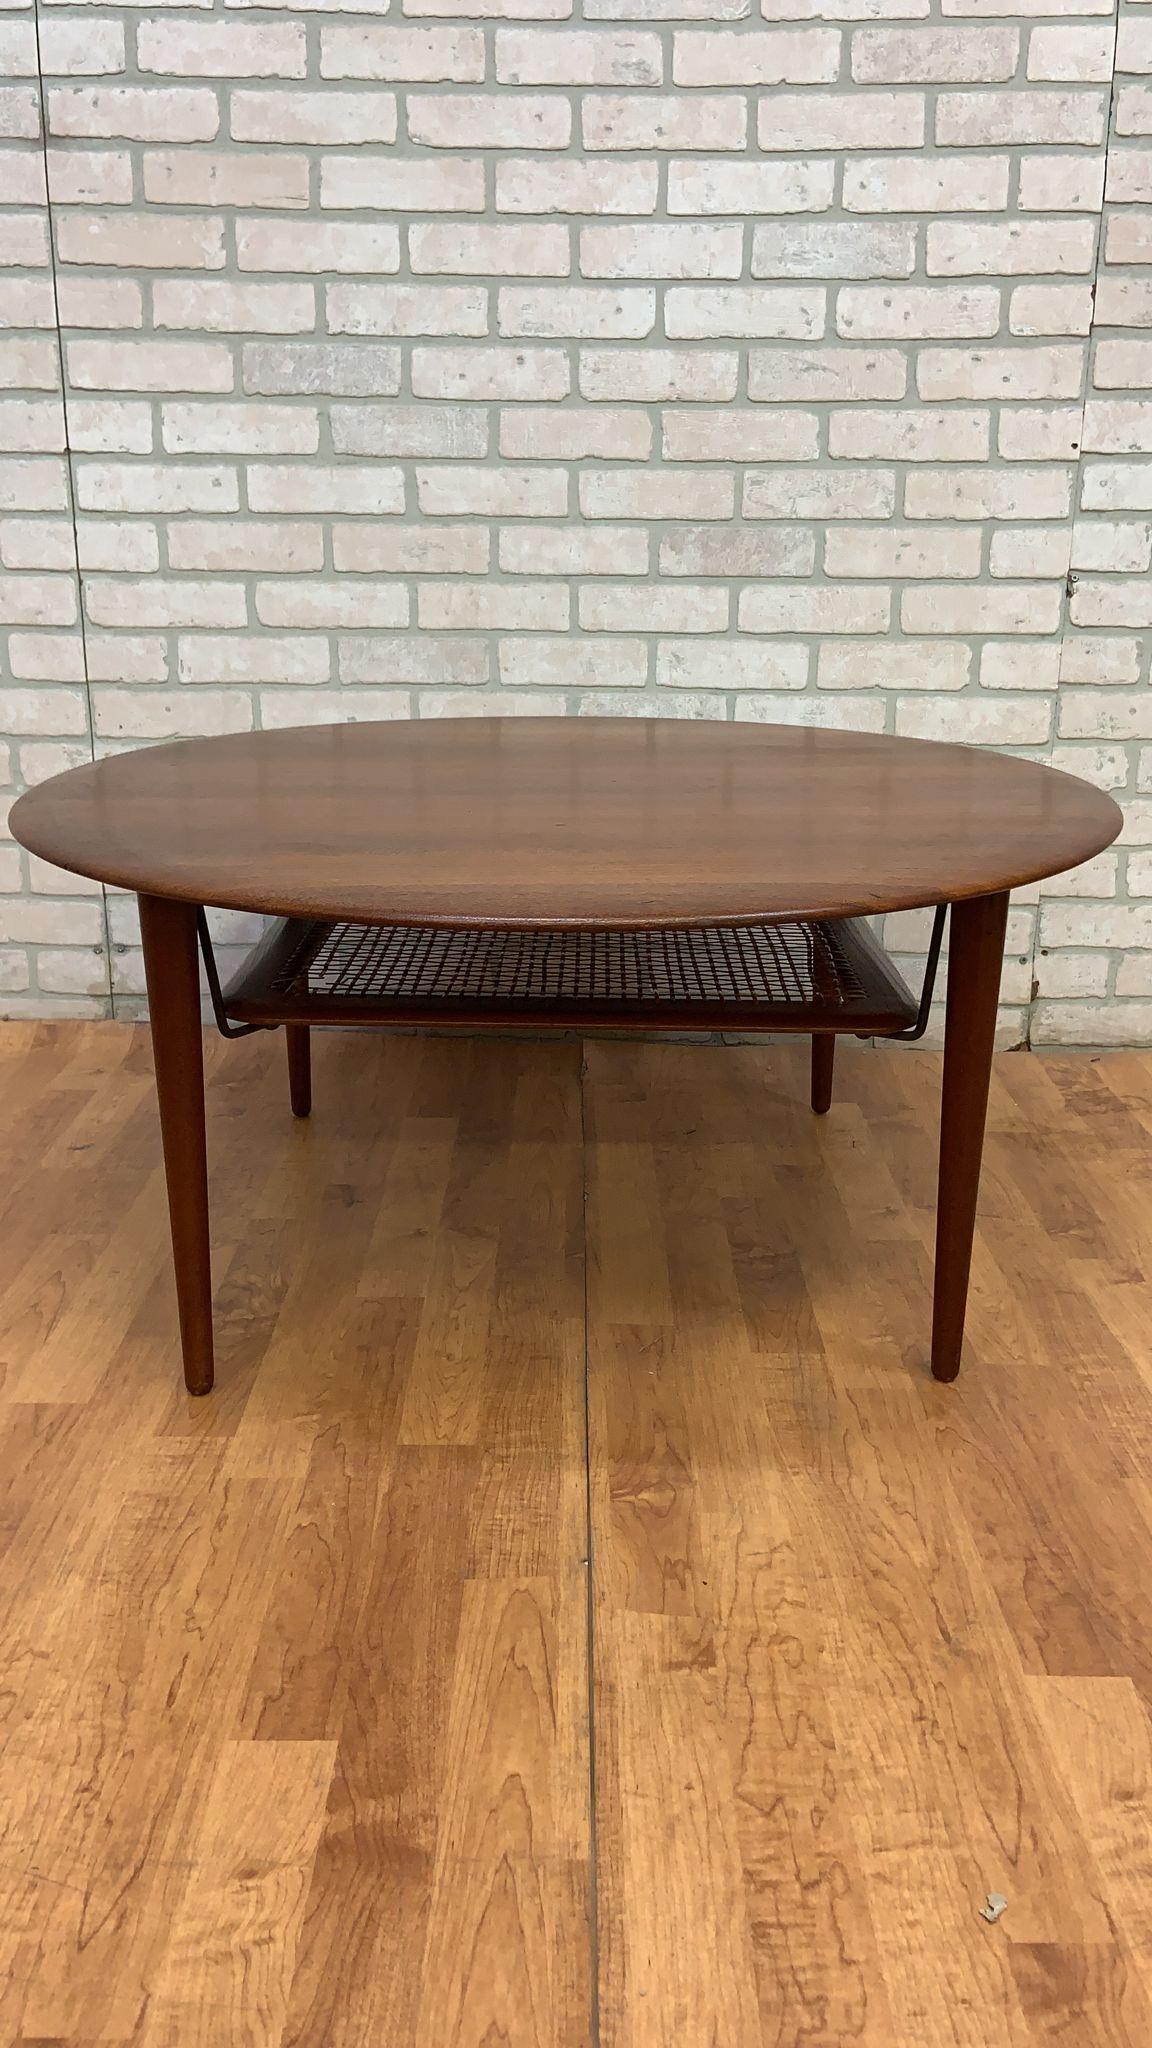 Vintage Danish France & Son Teak Coffee Table with Rattan Lower Shelf

This is a beautiful round France & Son Teak and Rattan Coffee Table will be the perfect piece to heighten any decor. With a rattan lower shelf this has a simple yet stunning